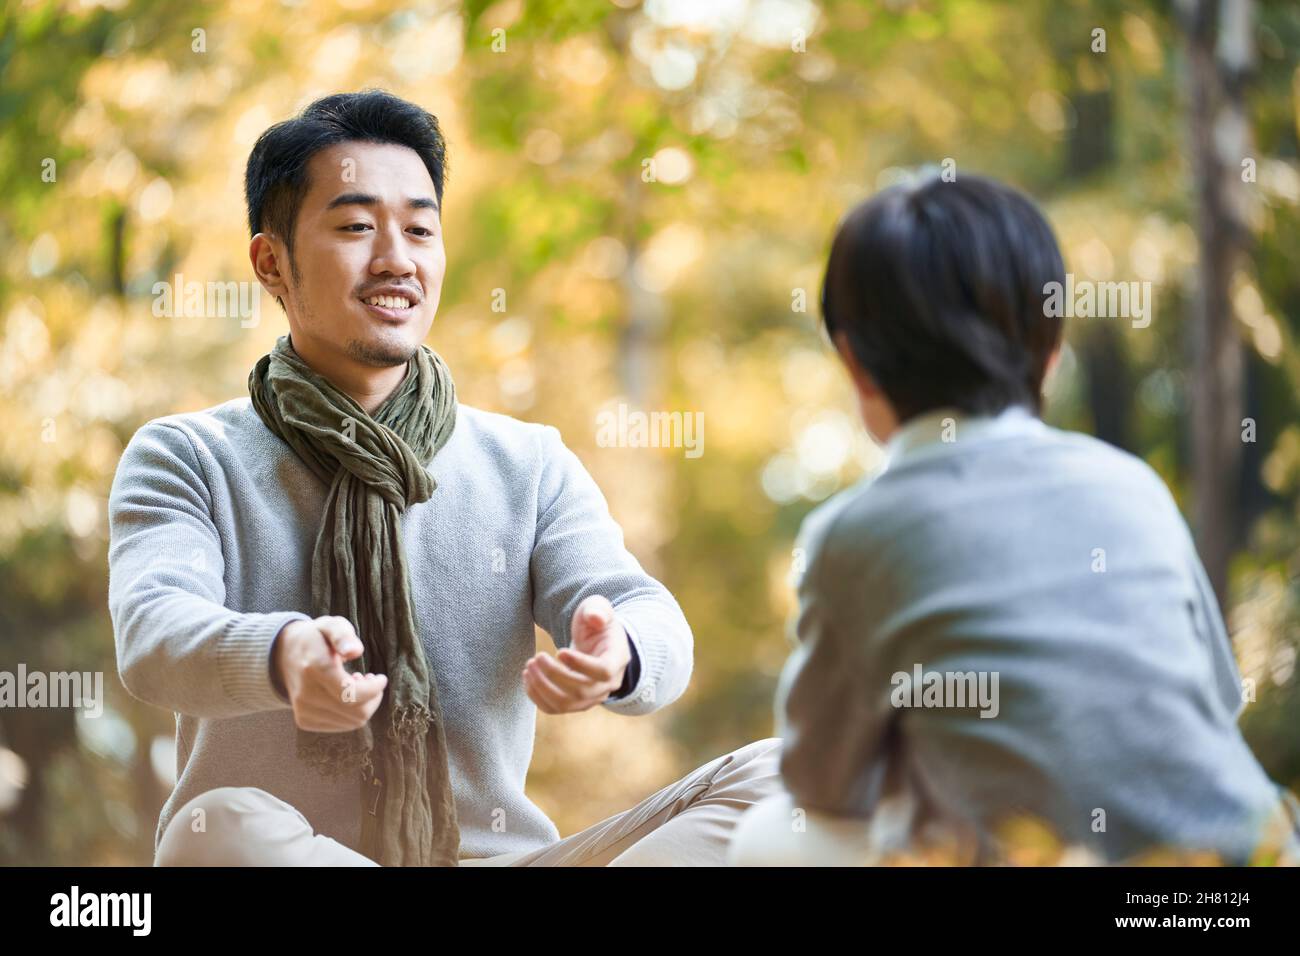 asian father and son sitting on grass having a pleasant conversation outdoors in park Stock Photo